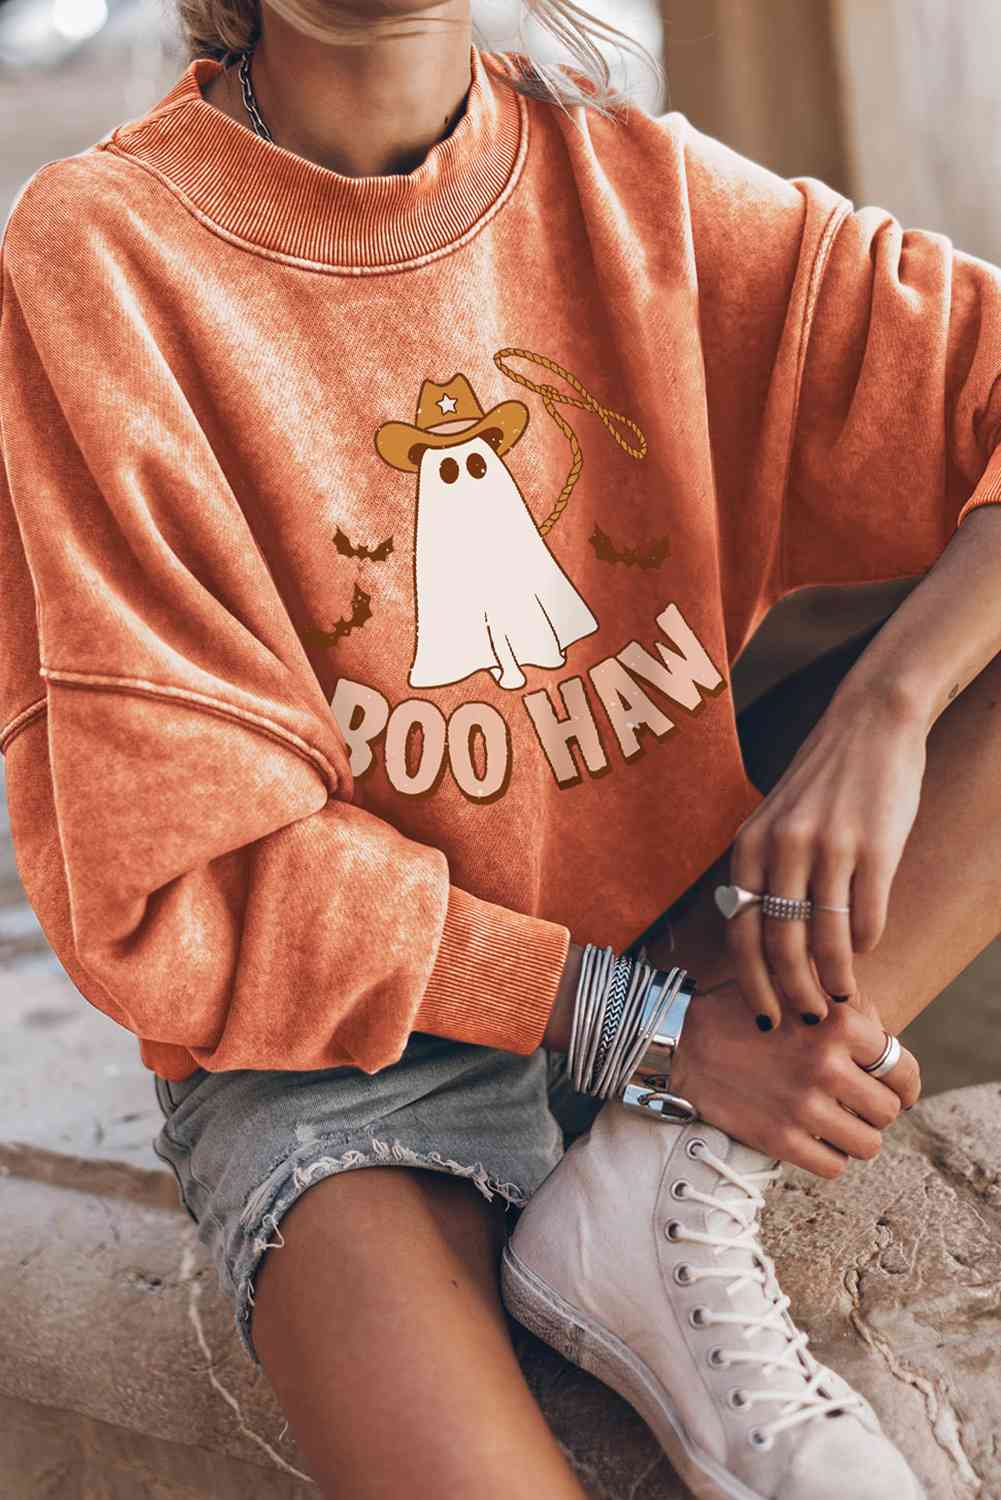 BOO HAW Ghost Graphic Dropped Shoulder Round Neck Sweatshirt